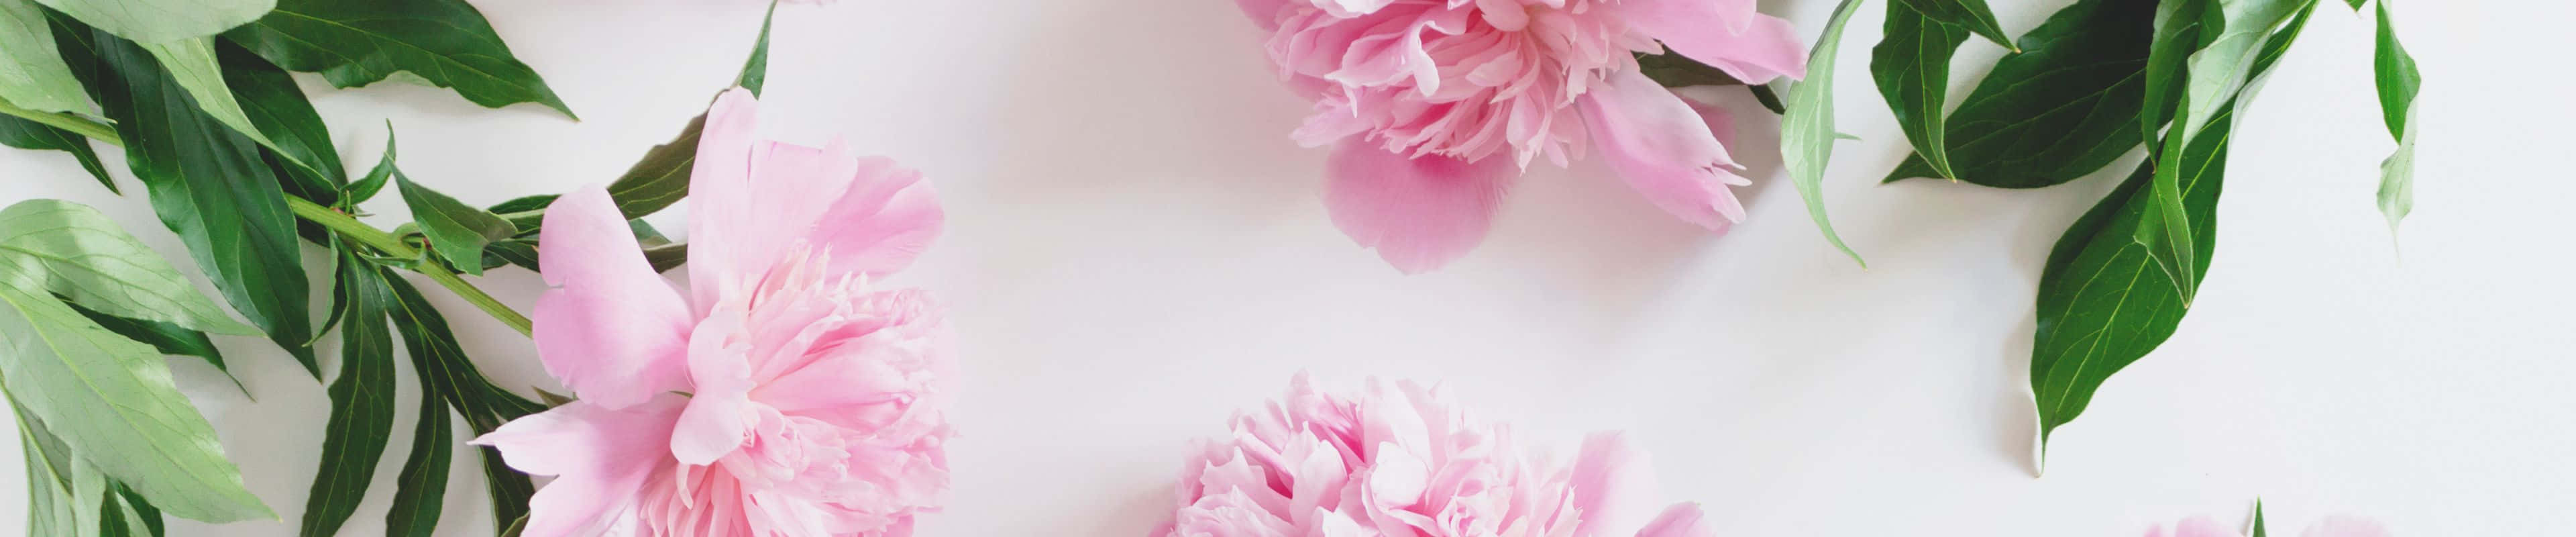 Pink Flowers On A White Background Wallpaper